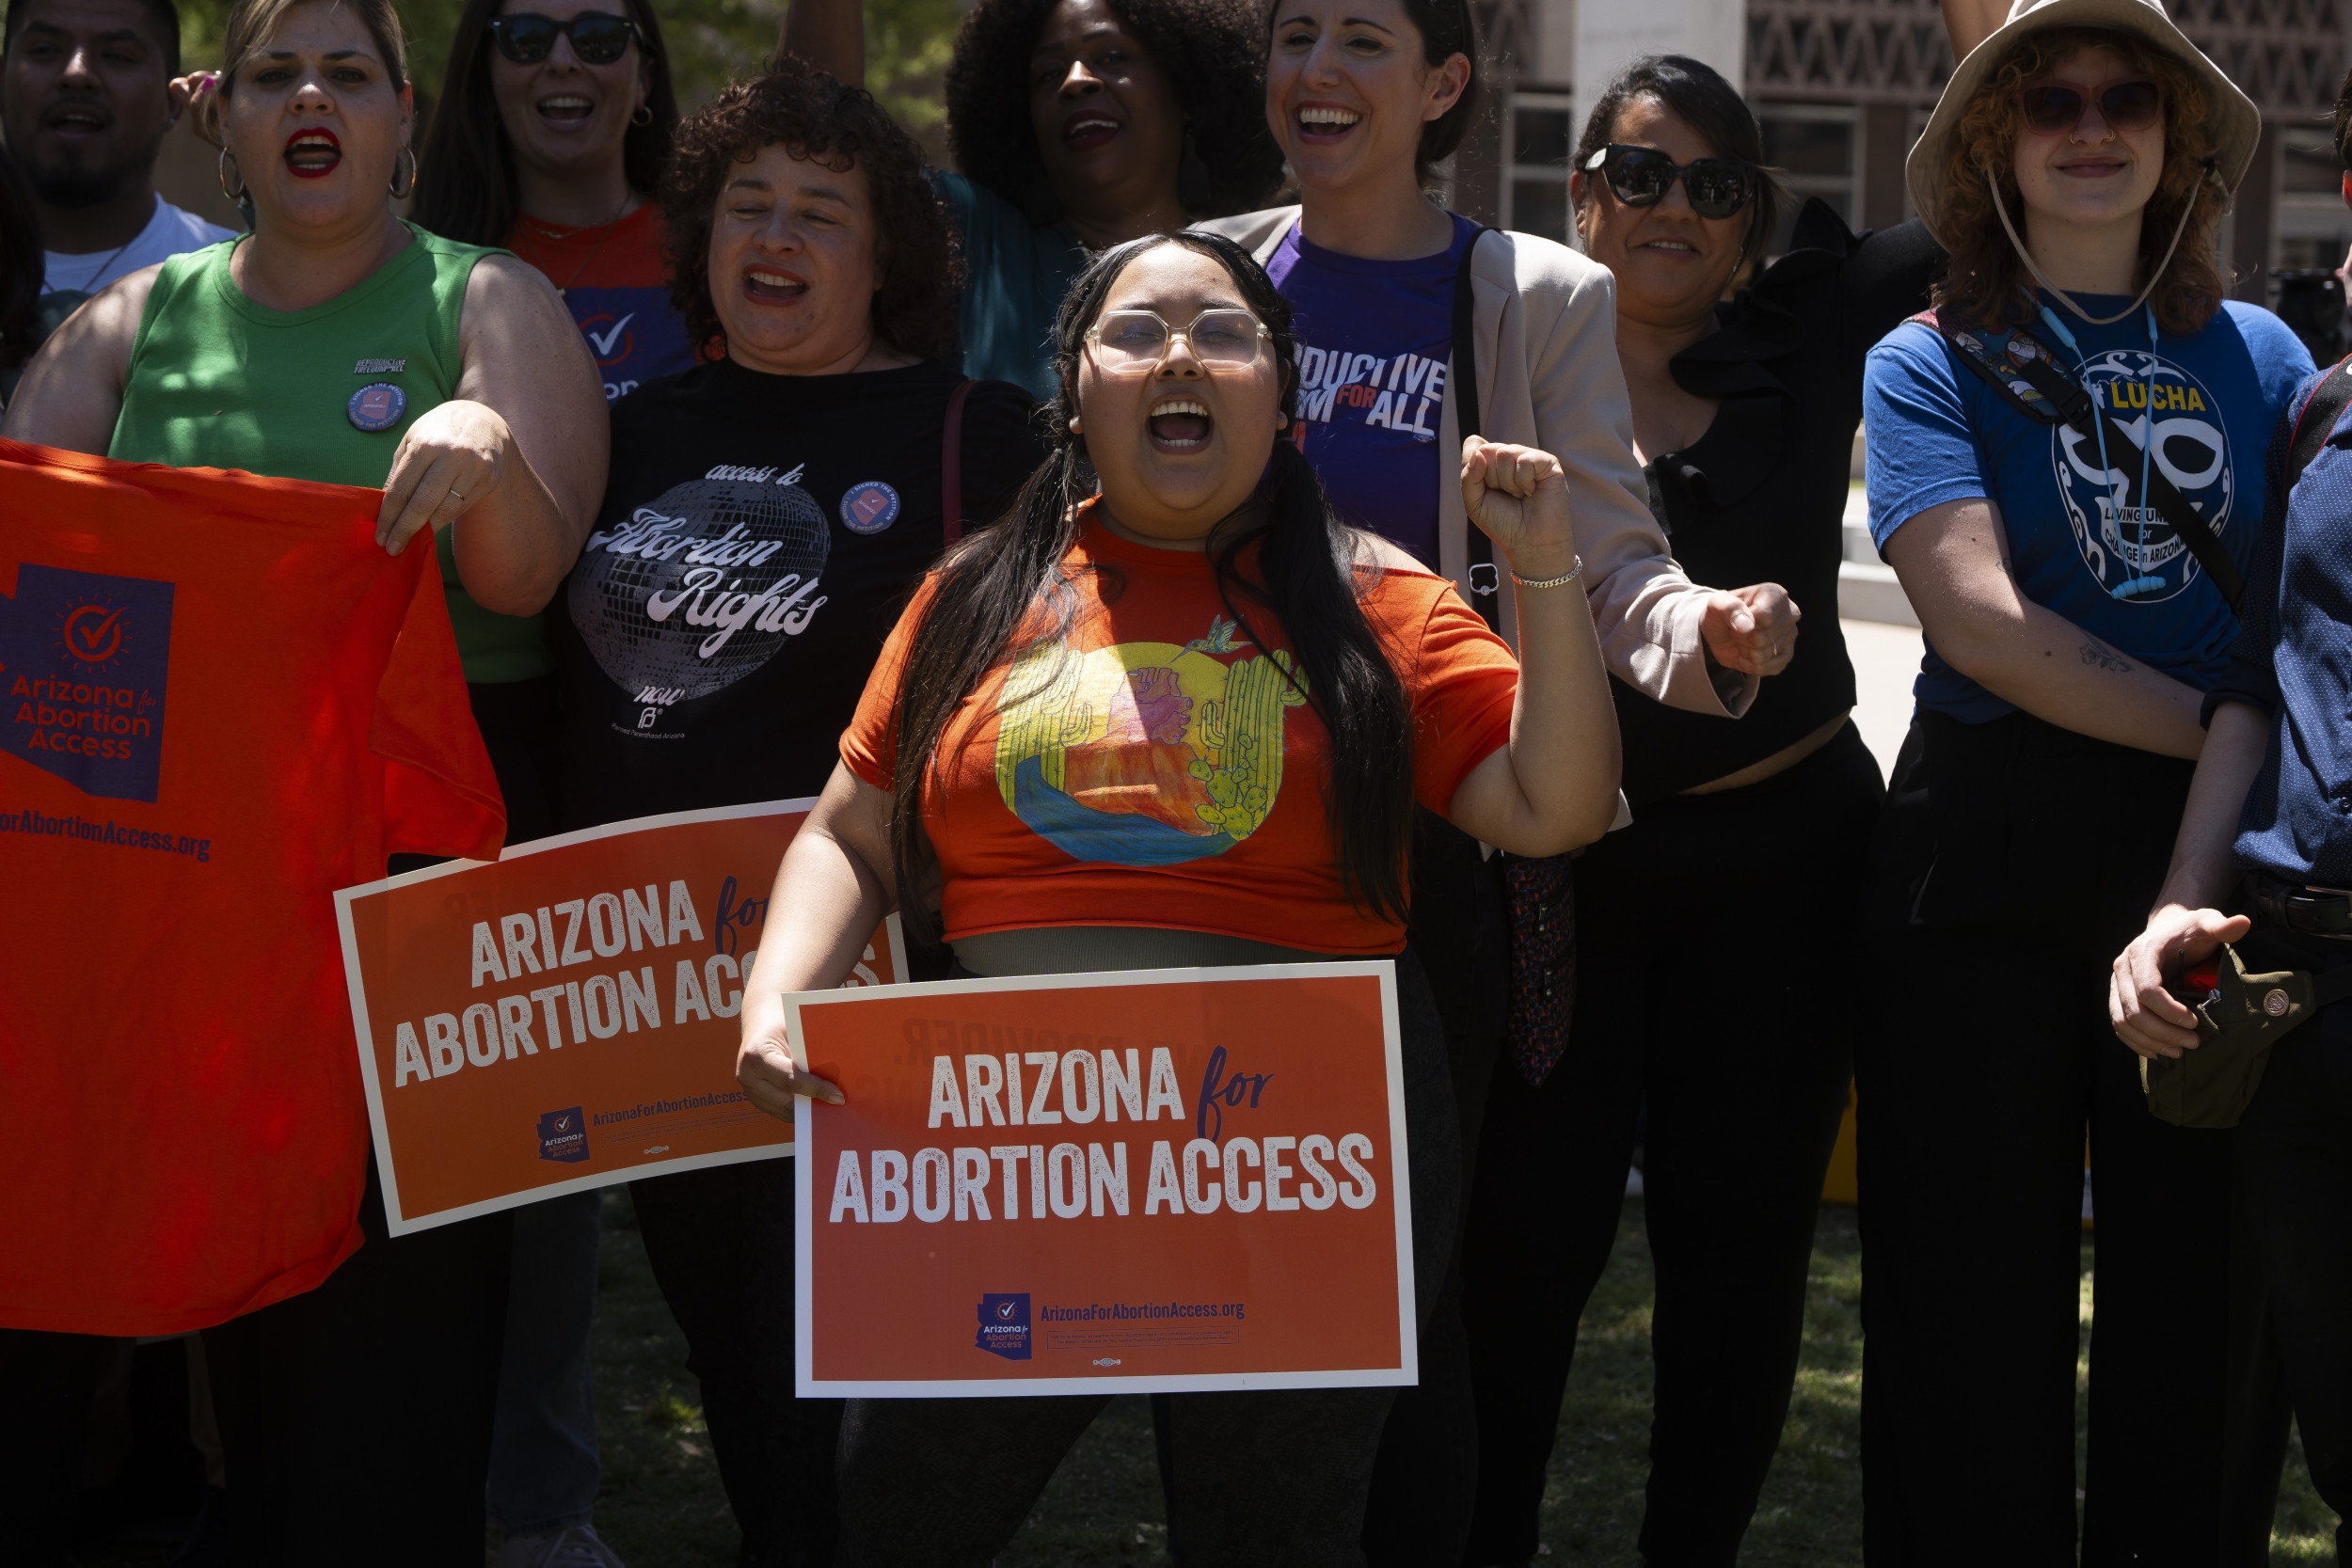 Arizona Republicans side with Democrats in bid to repeal abortion law